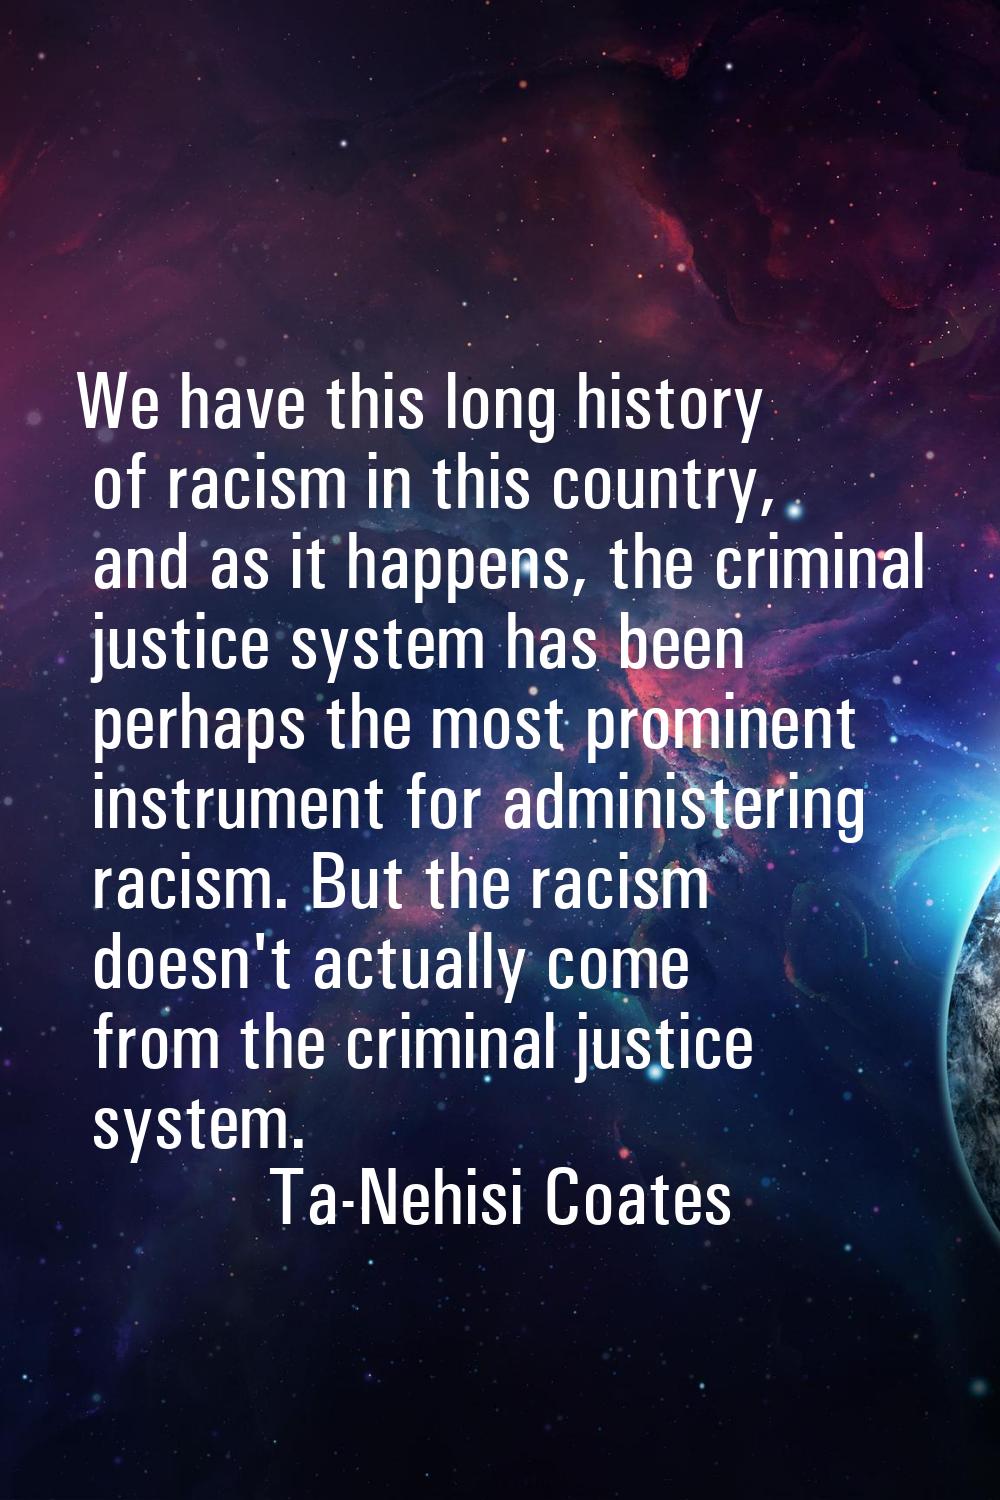 We have this long history of racism in this country, and as it happens, the criminal justice system